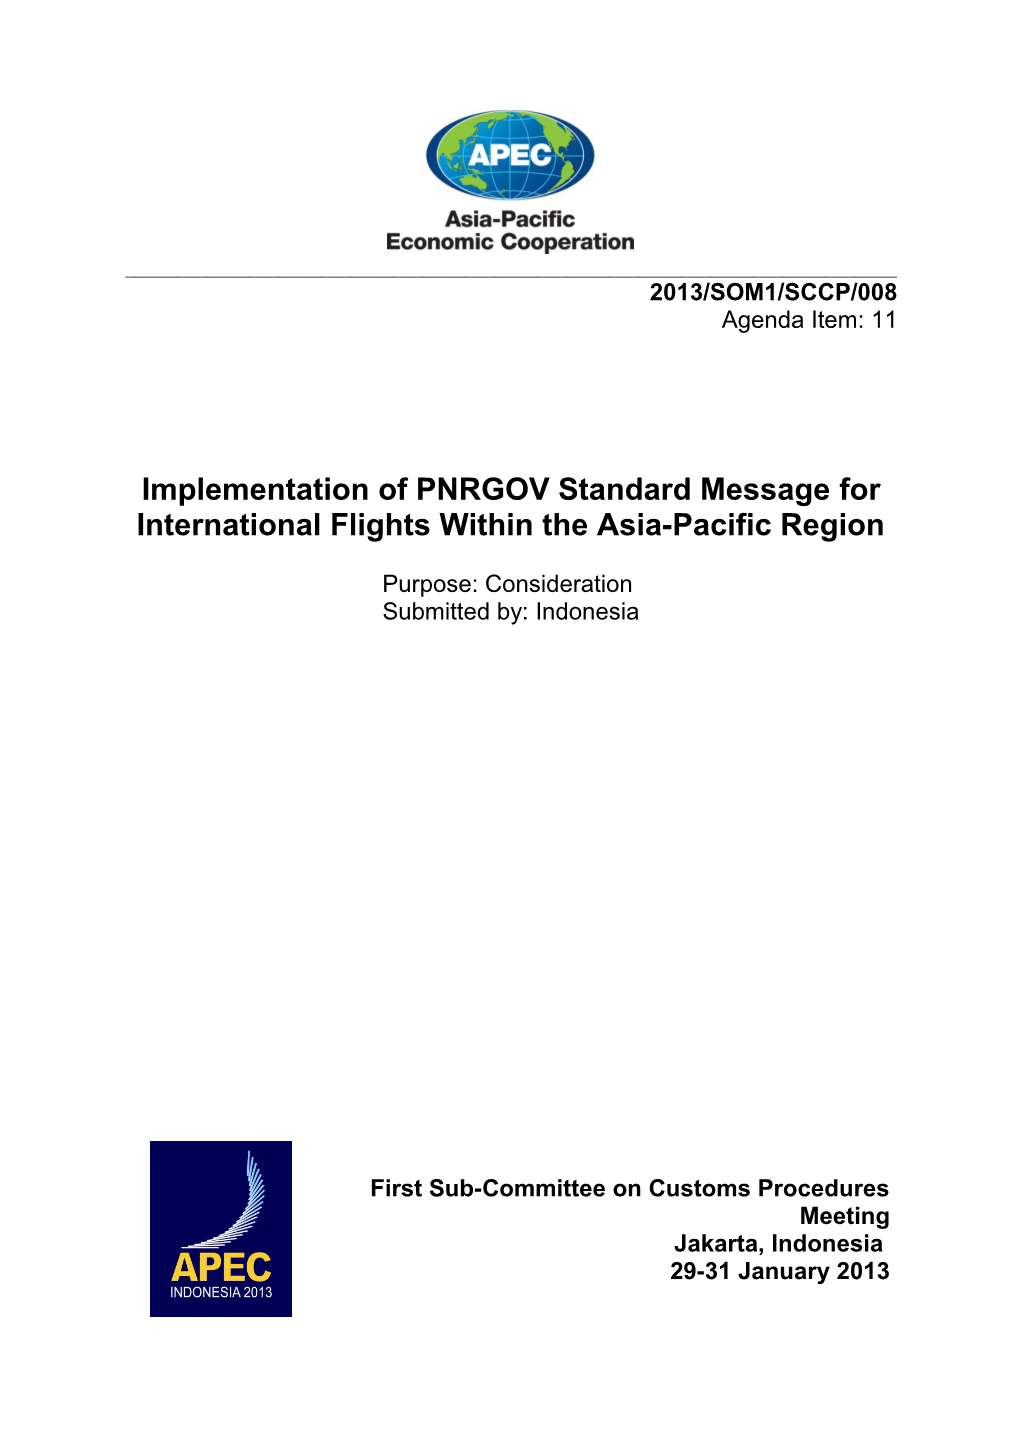 Implementation of PNRGOV Standard Message for International Flights Within the Asia-Pacific